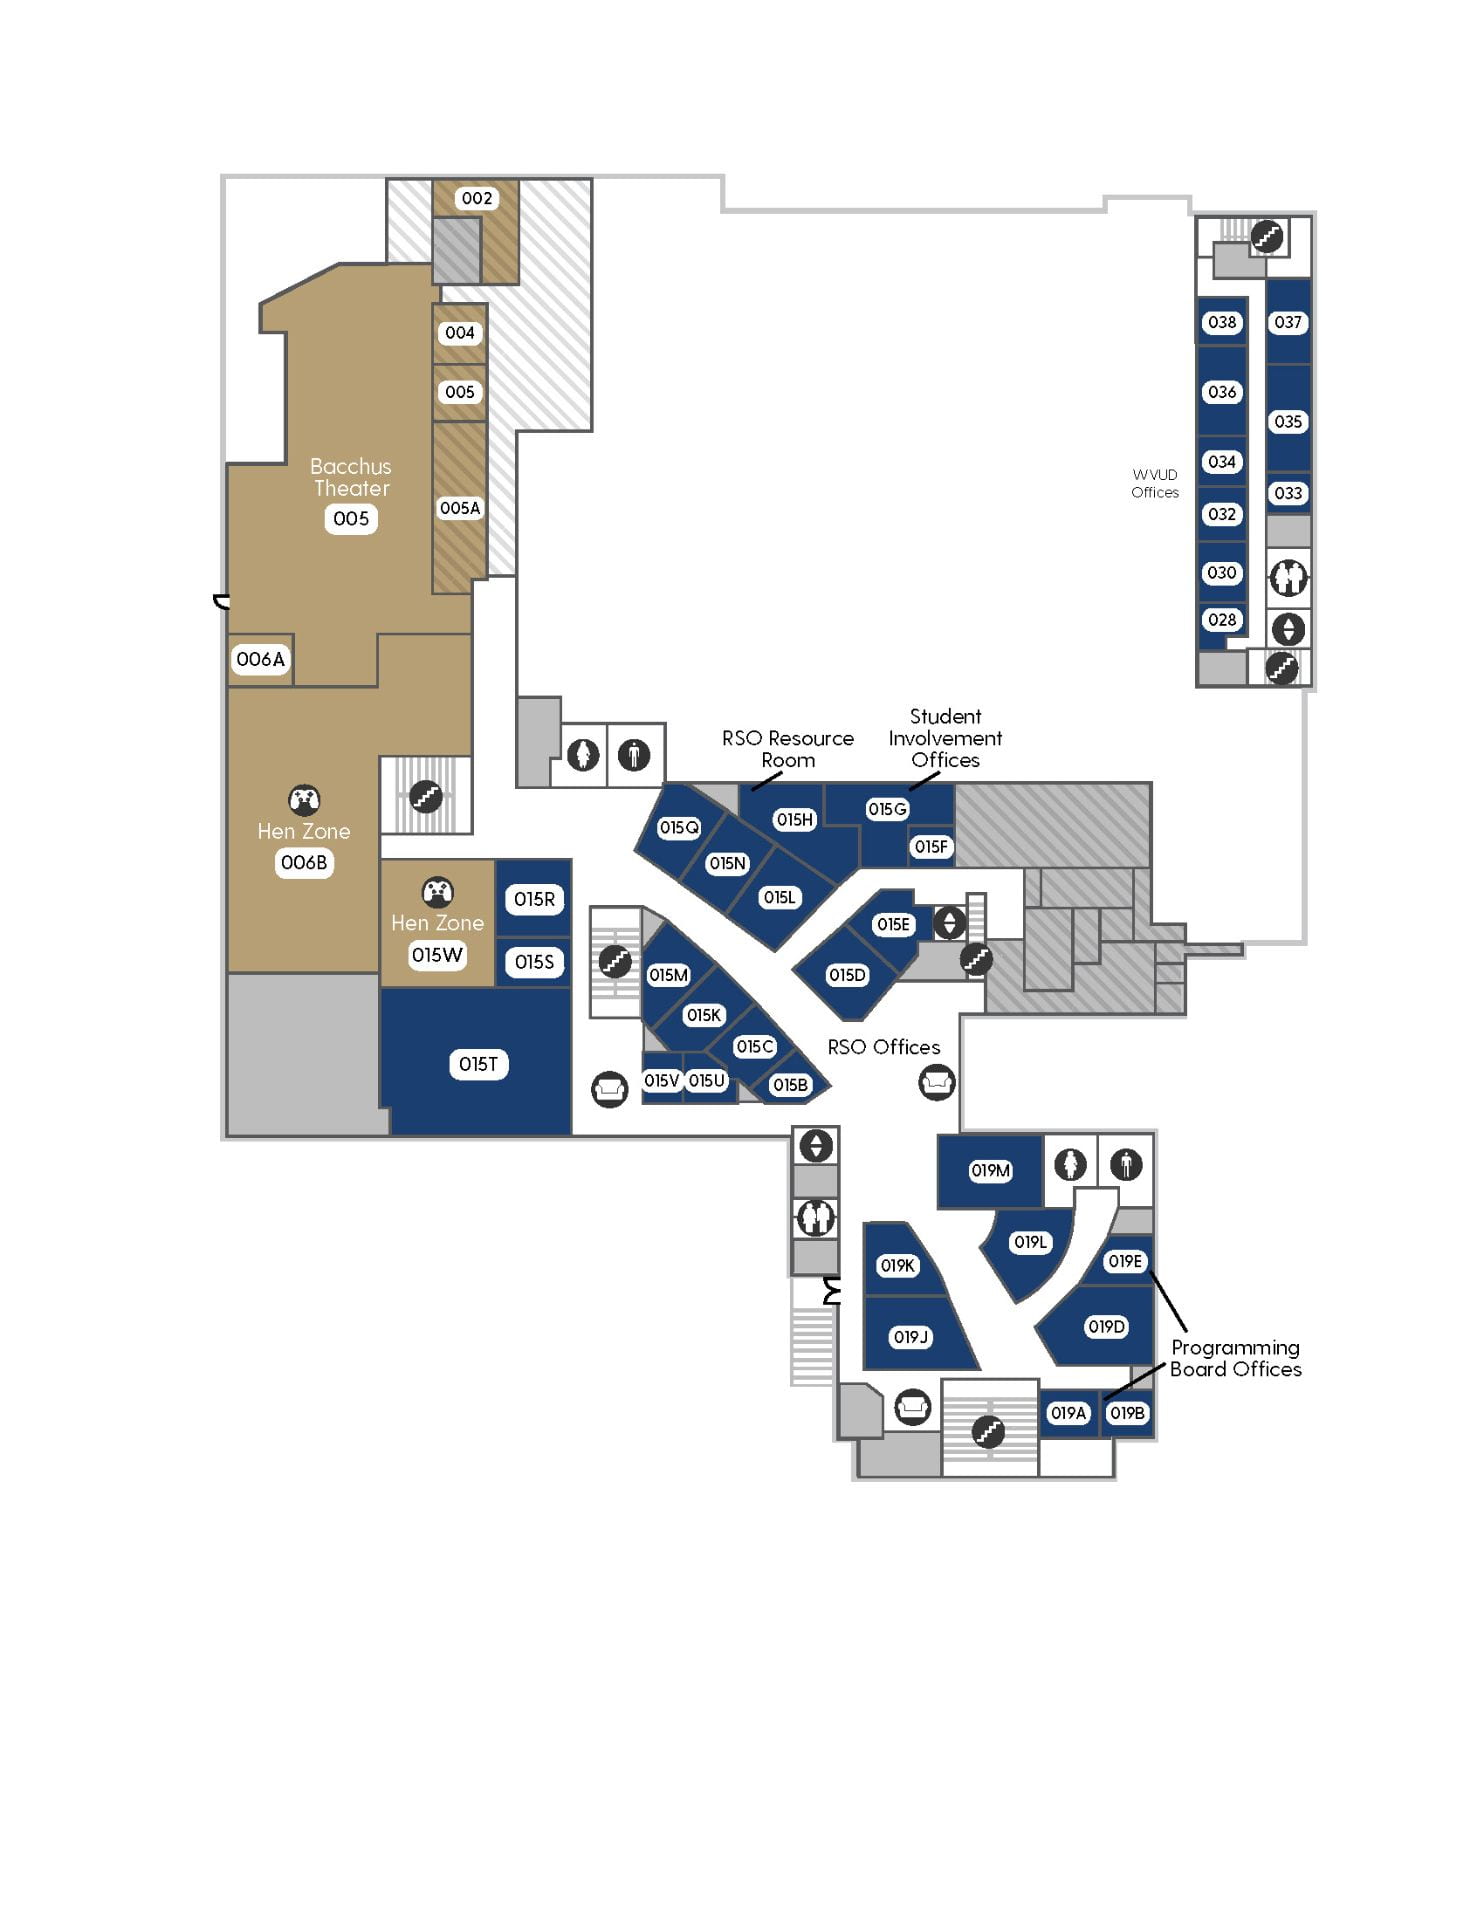 Perkins Lower Level Map, showing WVUD, Bacchus Theater, Student Involvement offices, and the UD Programming Board office